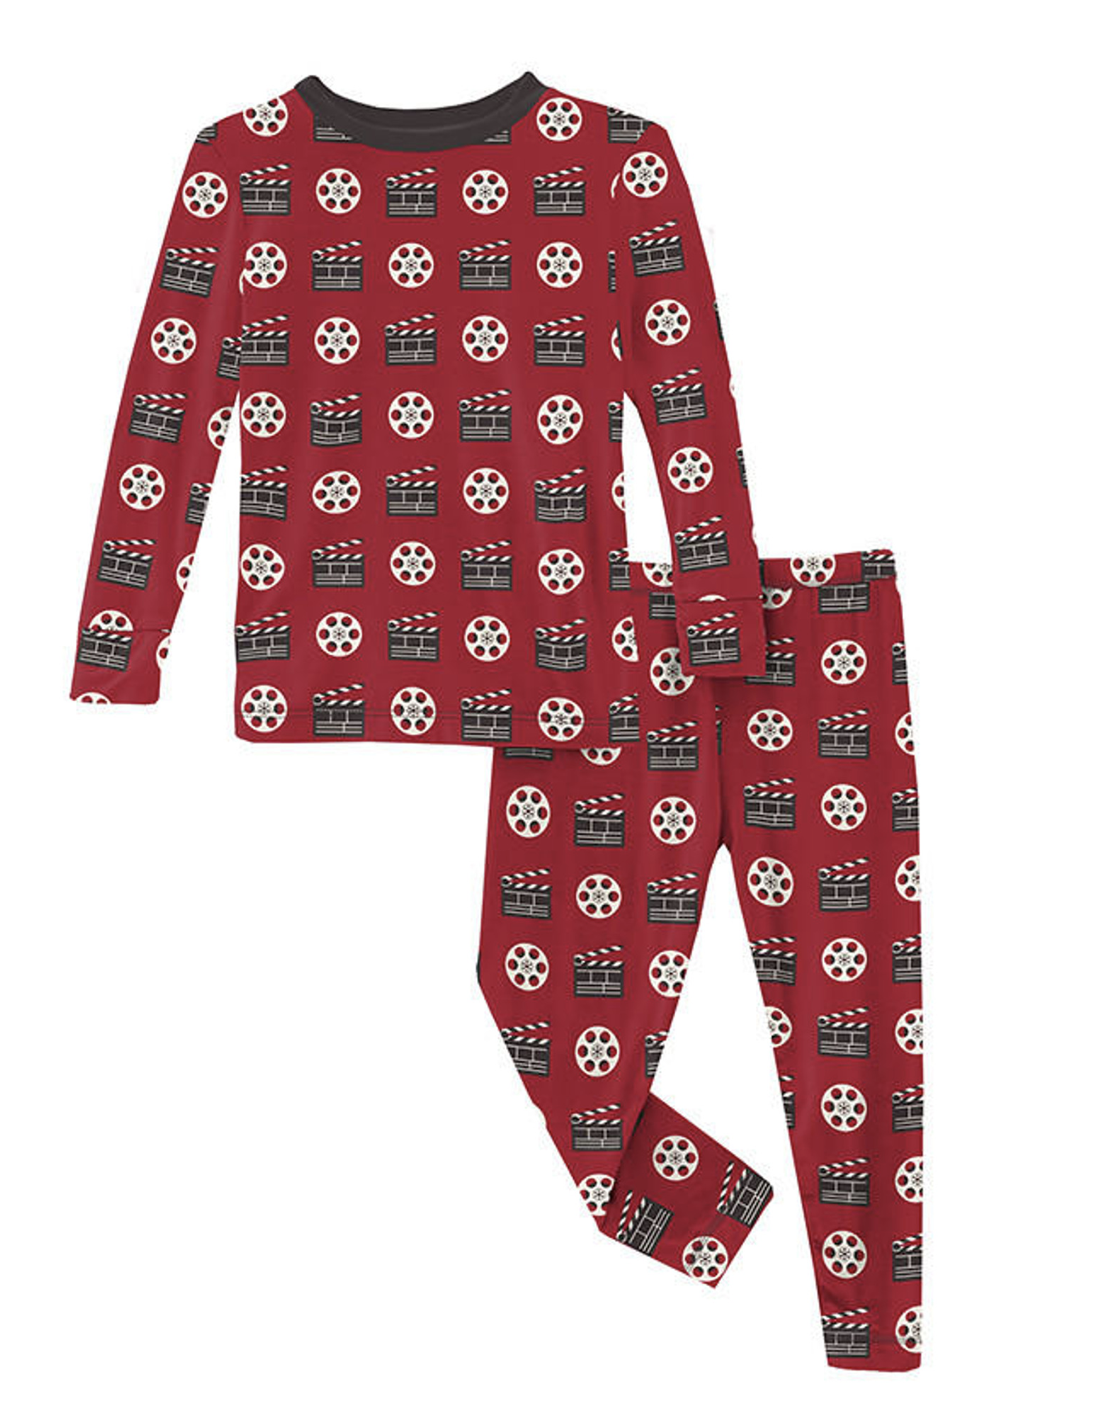 Kickee Decades Collection- Print Long Sleeve Pajama Set- Candy Apple Clapper Board and Film